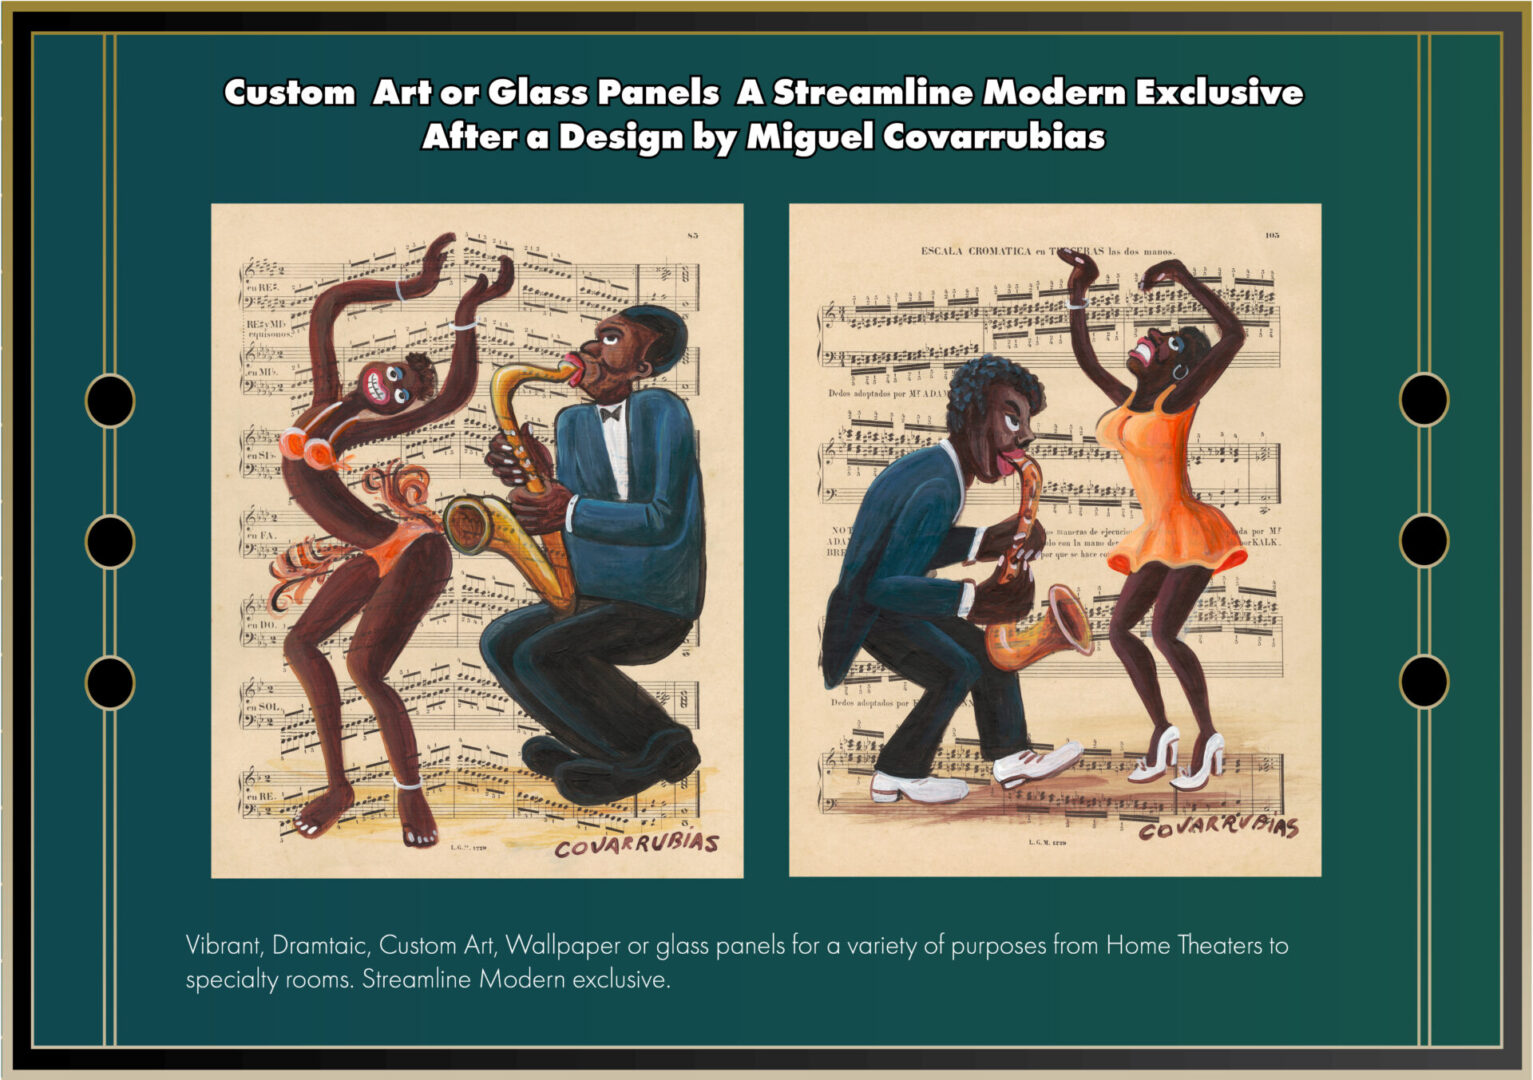 Saxophone player and dancer designed by Miguel Covarrubias